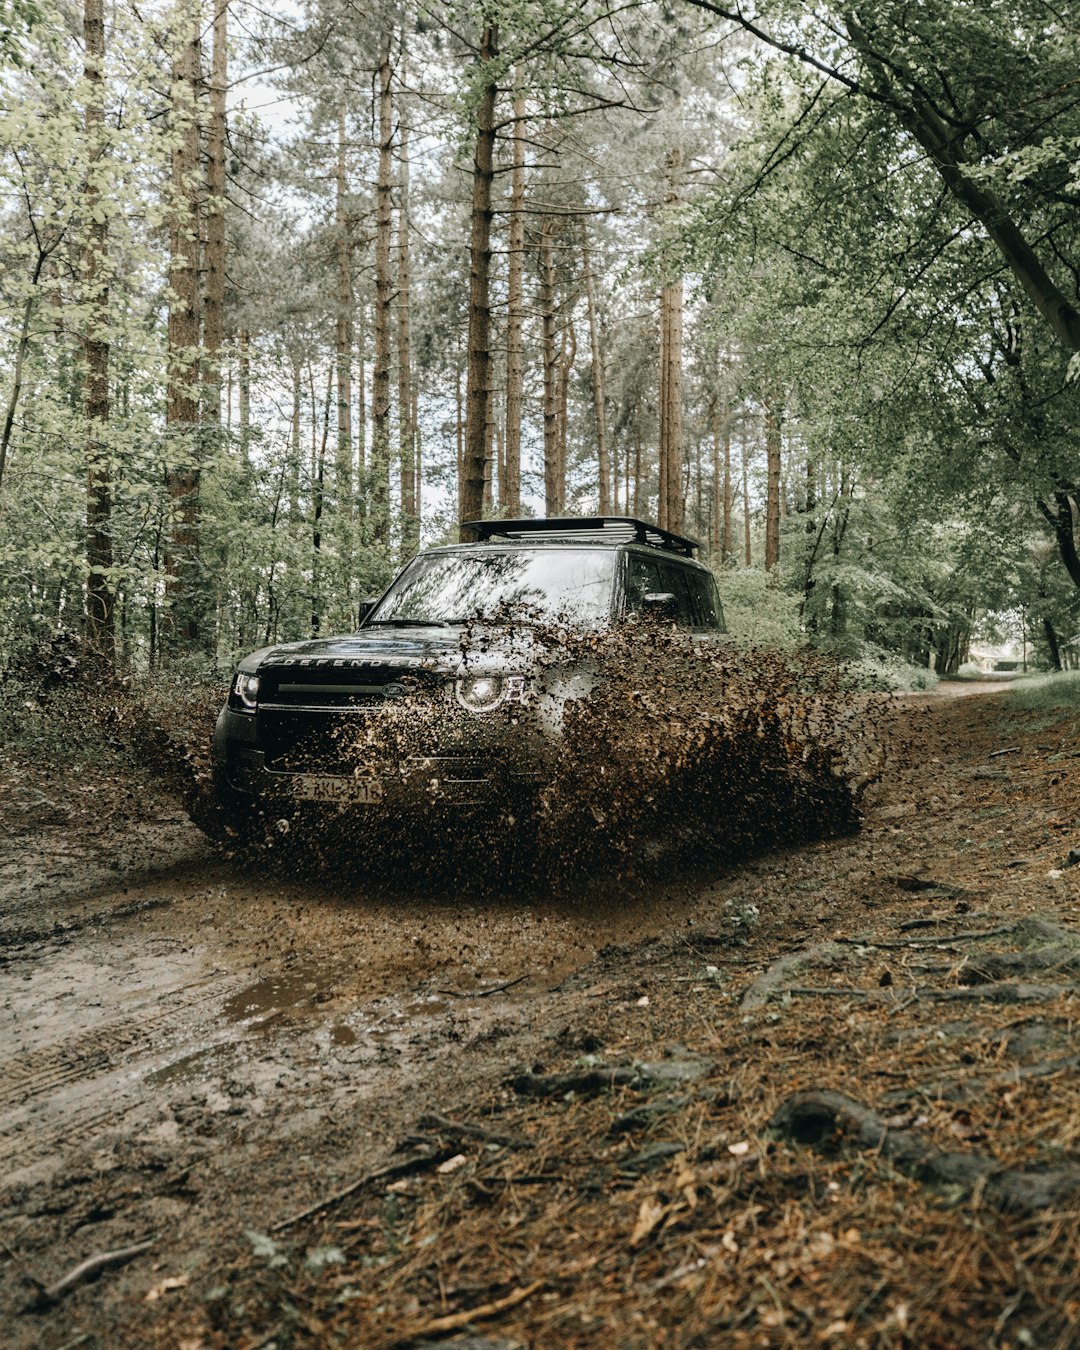 black car on dirt road in between trees during daytime